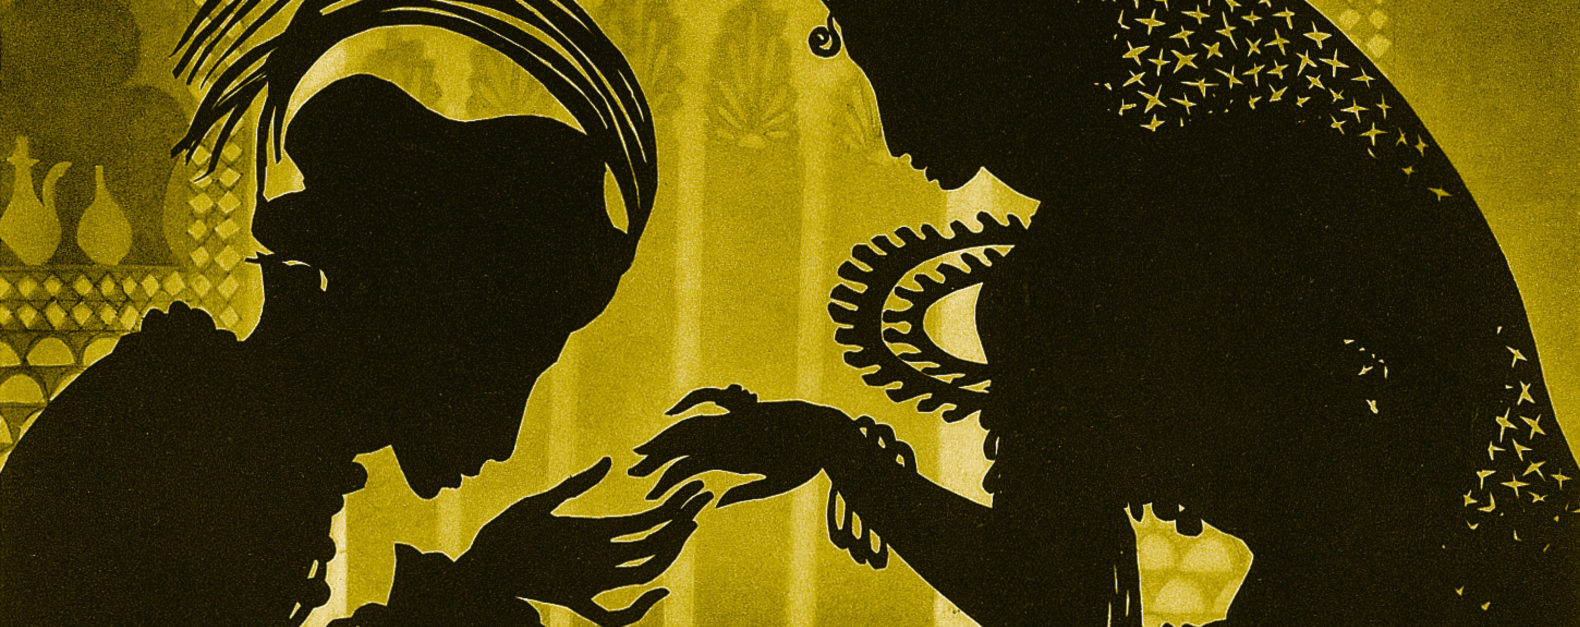 A still from The Adventures of Prince Achmed